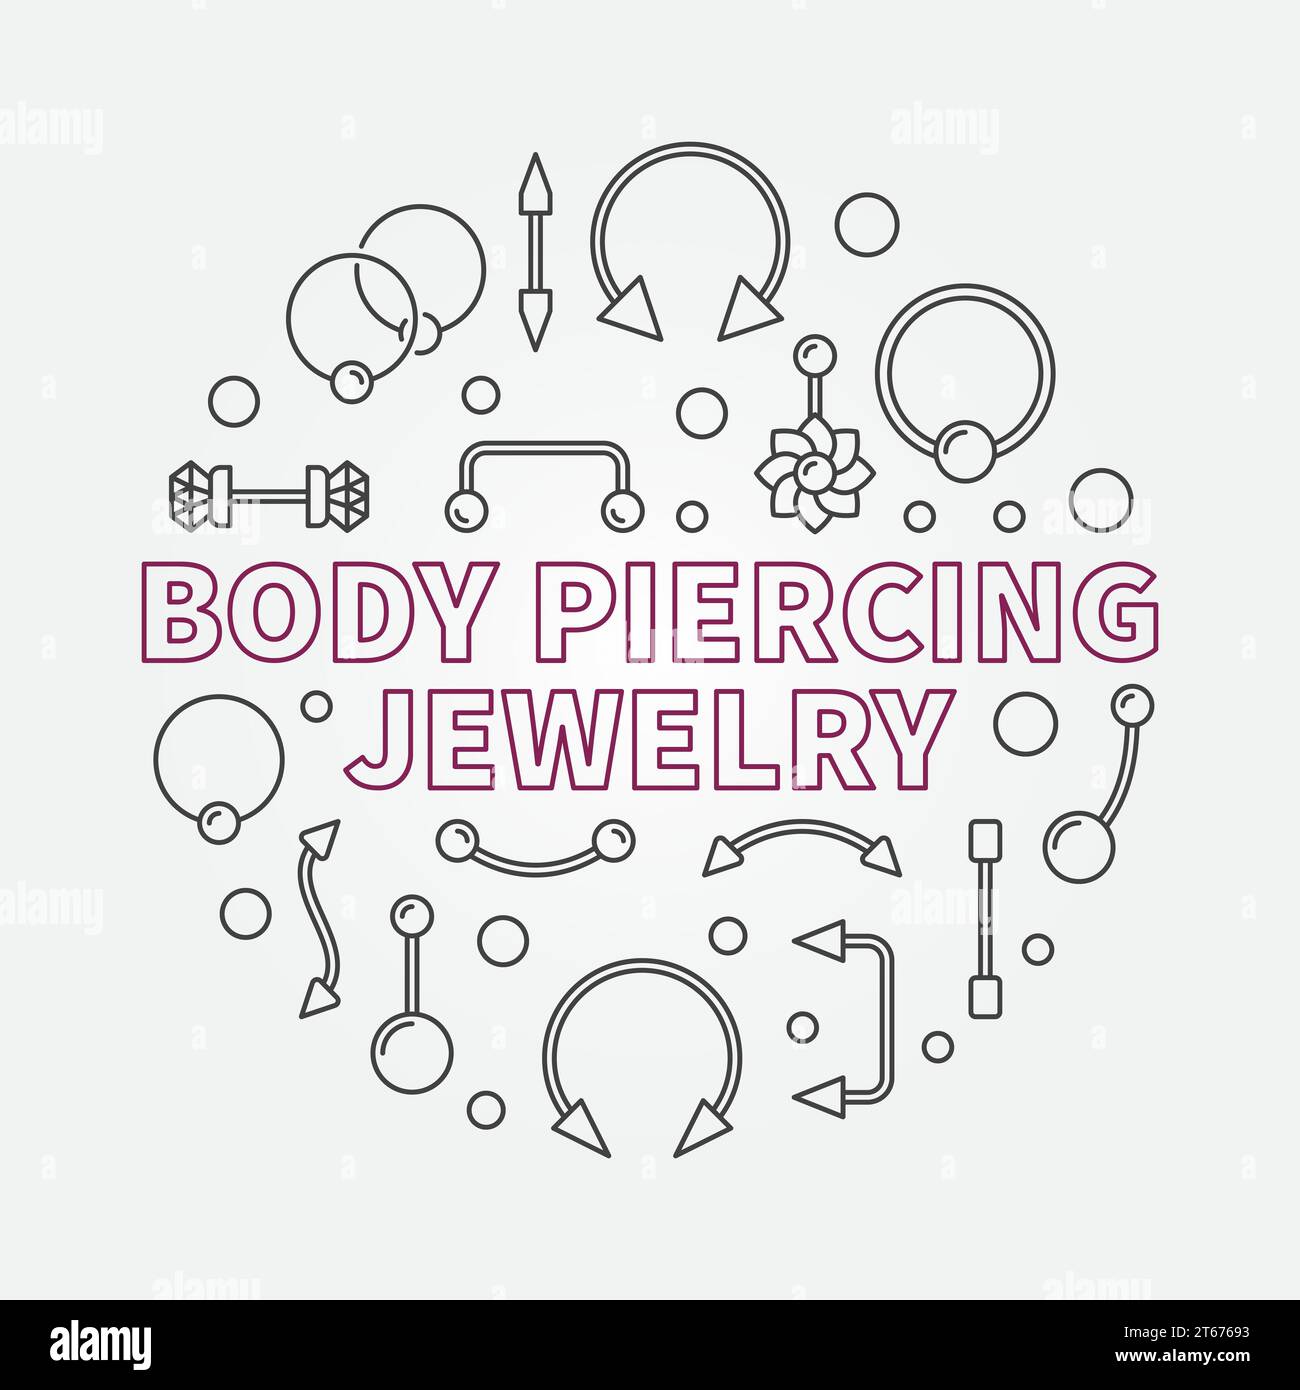 Body piercing jewelry vector modern illustration made with piercings cute icons in thin line style Stock Vector